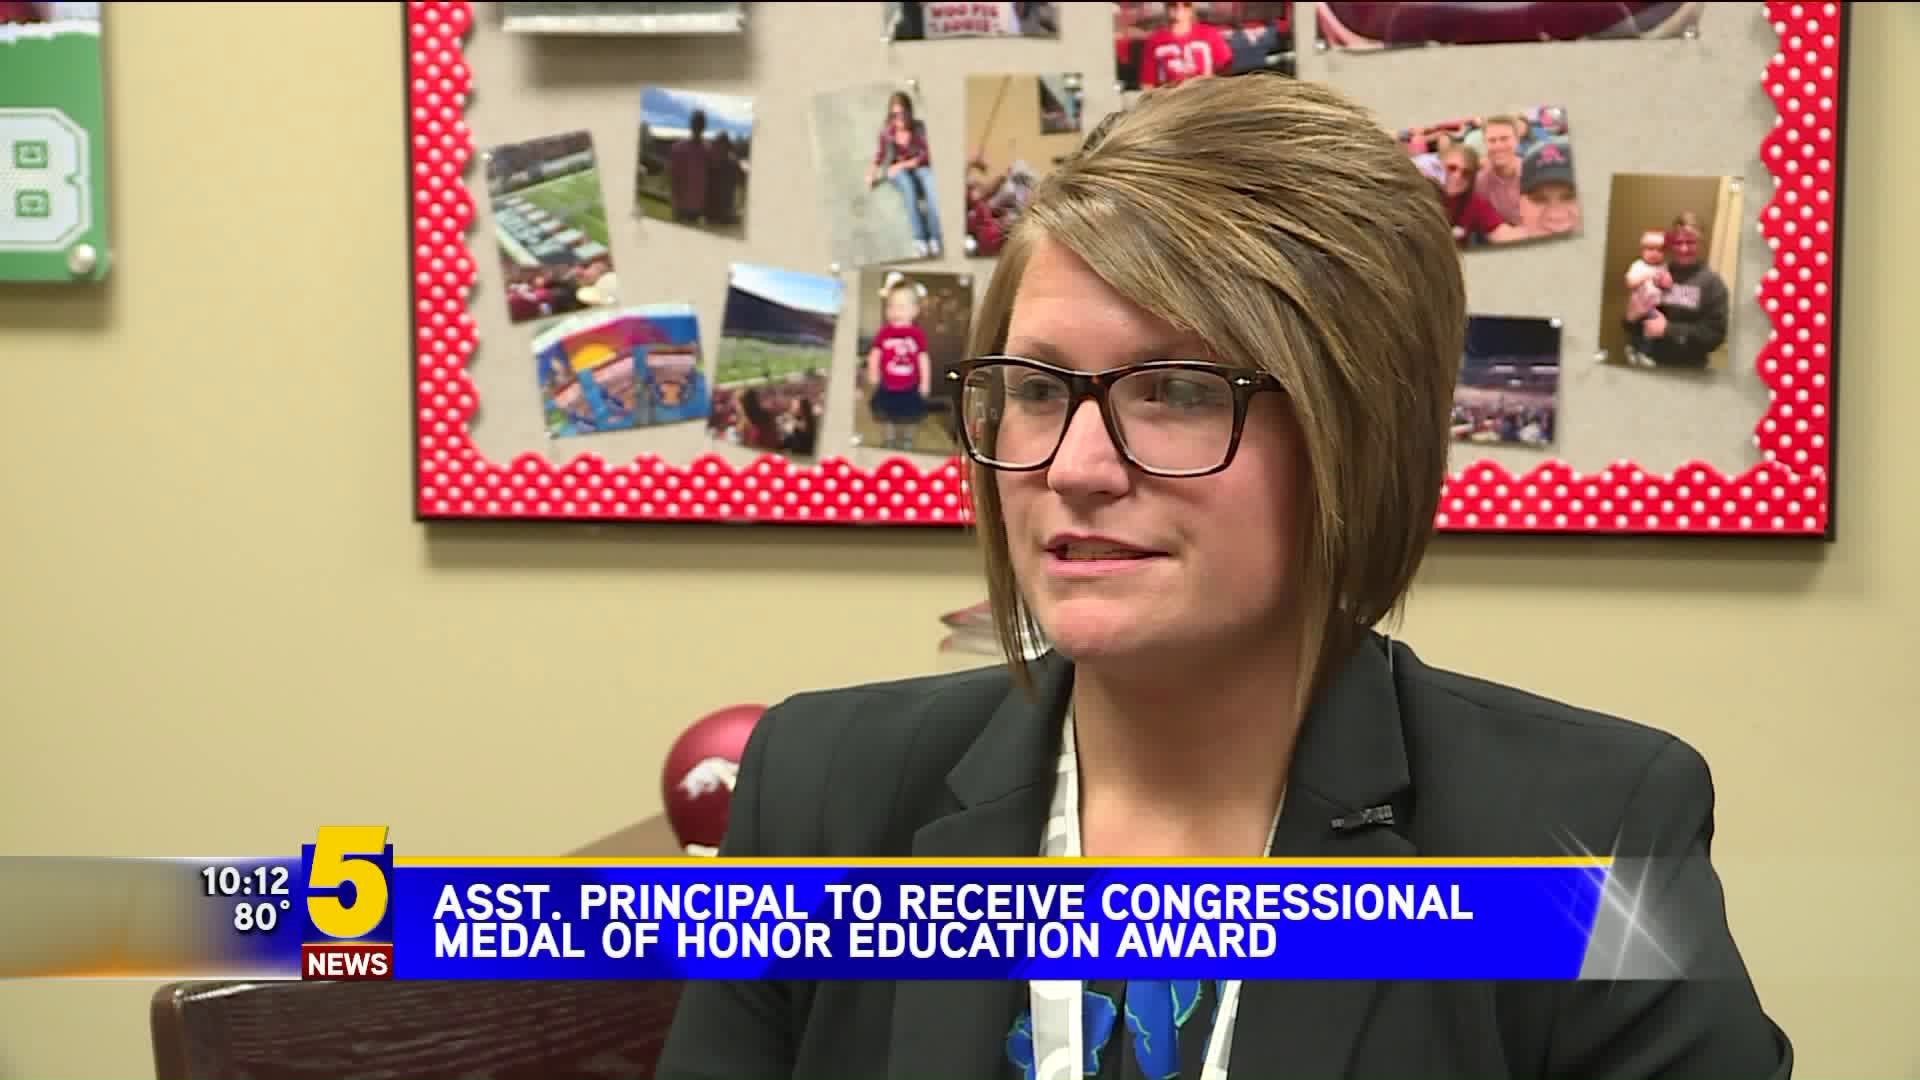 VB Asst. Principal To Receive Congressional Medal Of Honor Education Award